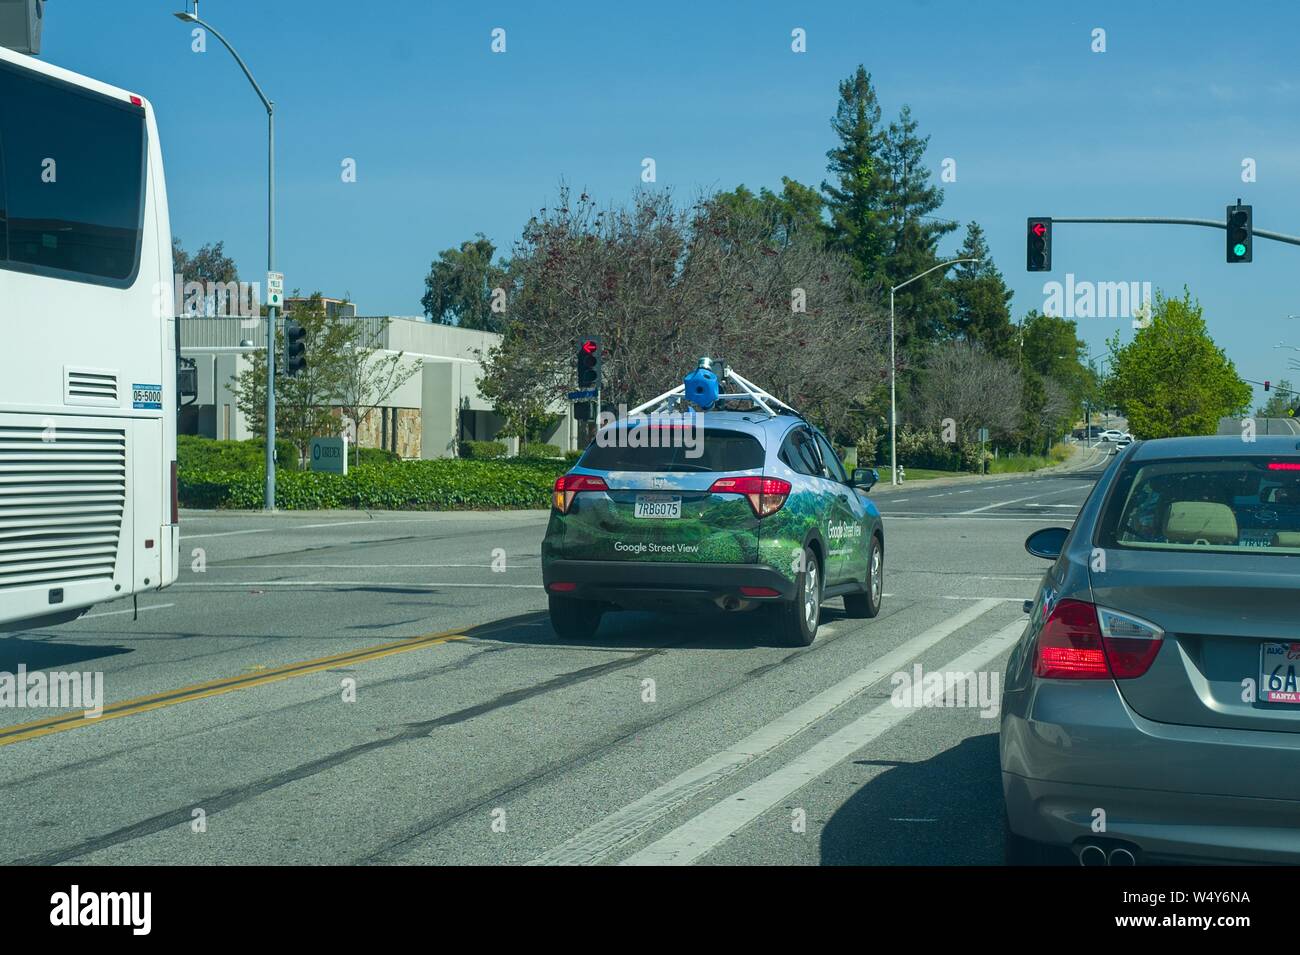 Google Street View vehicle with equipment for recording 360 degree images  for the Google Maps platform, driving down a street in the Silicon Valley,  Mountain View, California, May 3, 2019 Stock Photo - Alamy